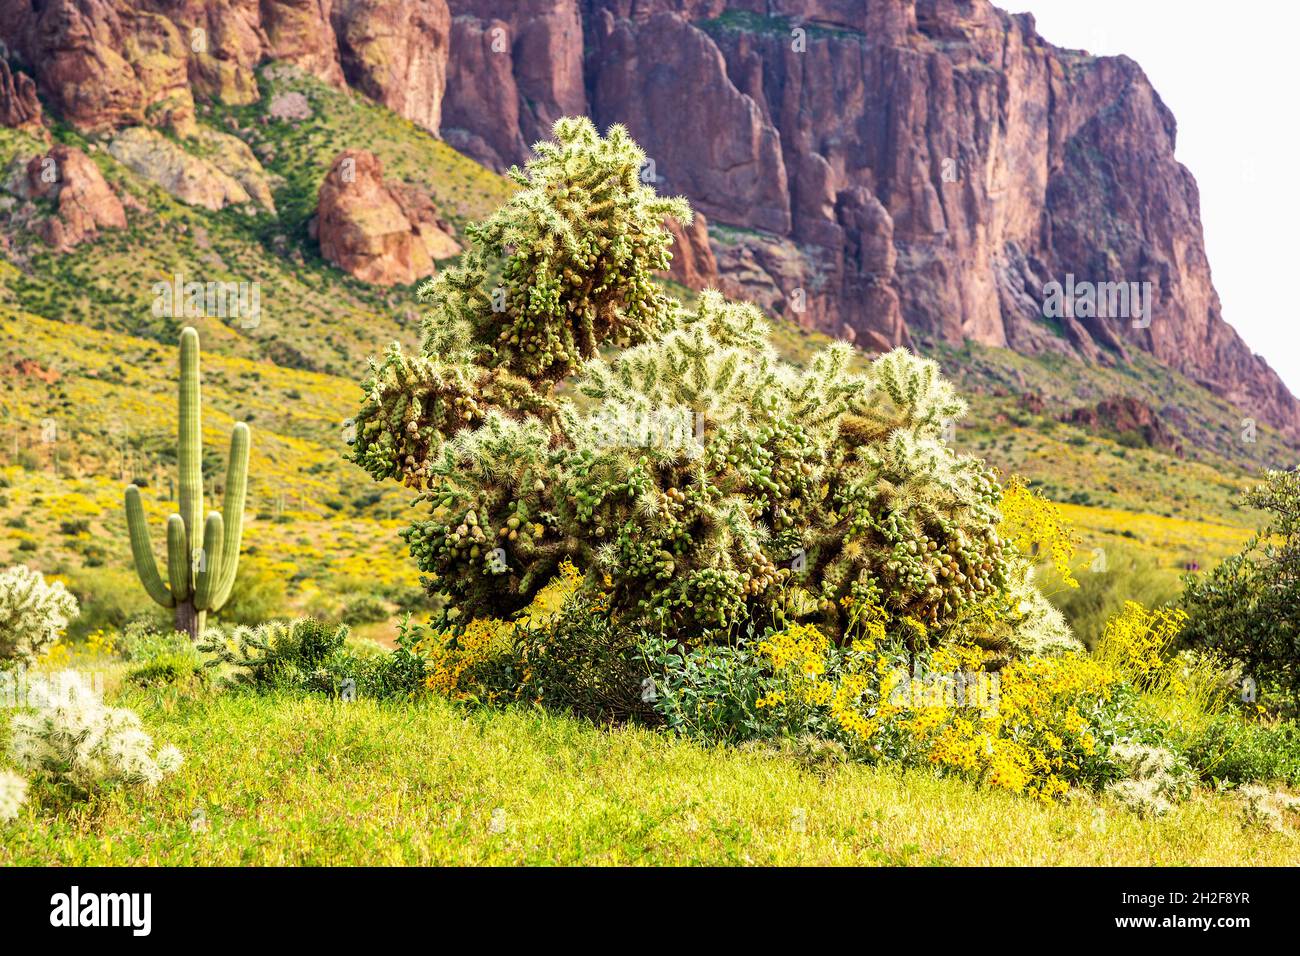 Chain fruit cholla, saguaro cacti, and yellow brittlebush with Flatiron Peak in the background in springtime. Lost Dutchman State Park in bloom. Stock Photo